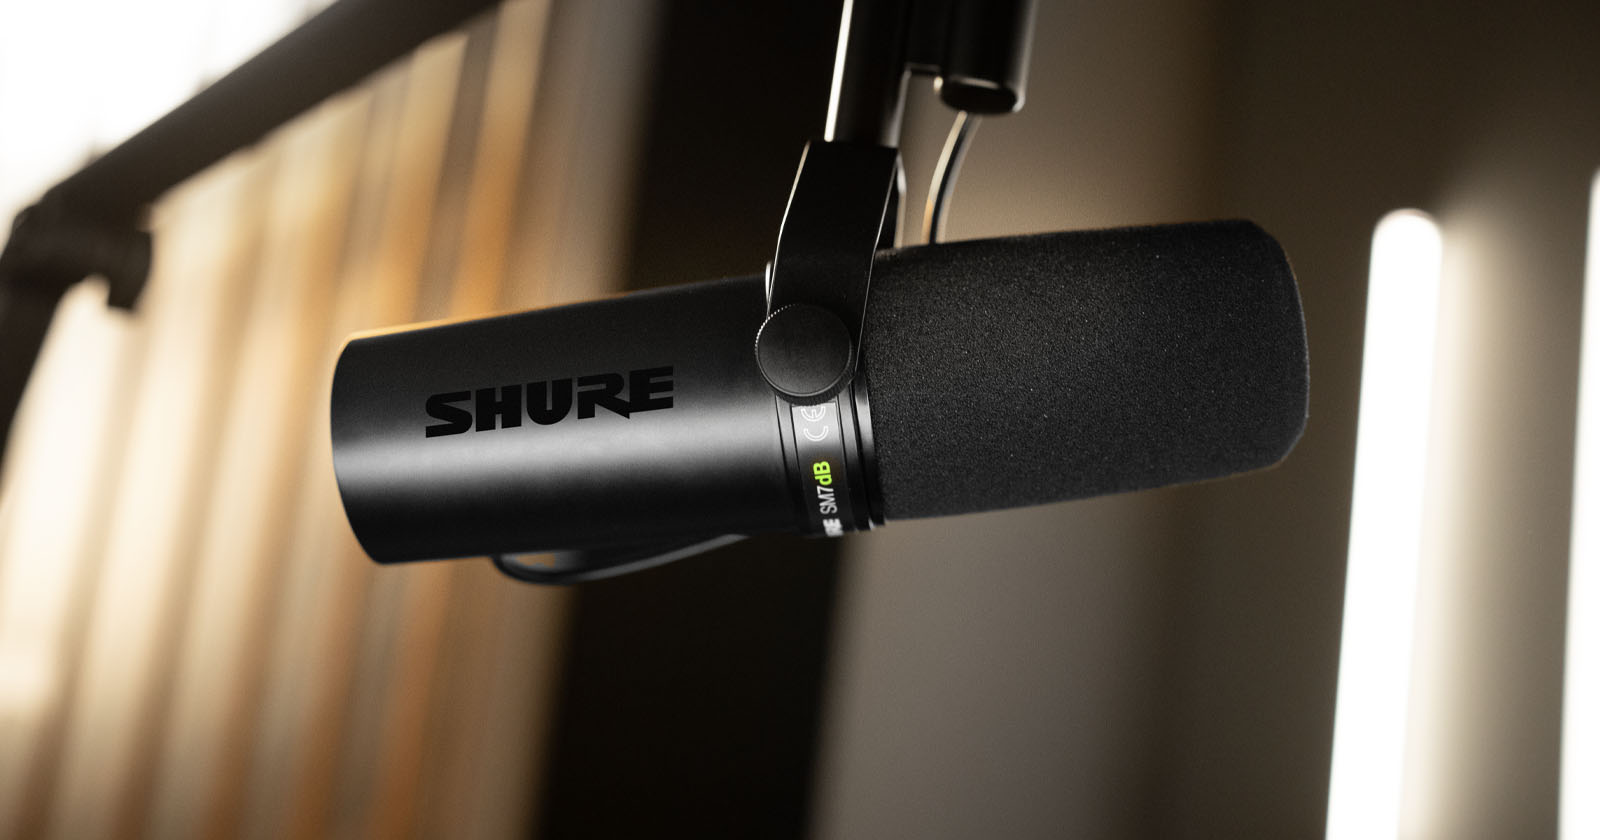  shure vocal mic has built-in preamp simplify 